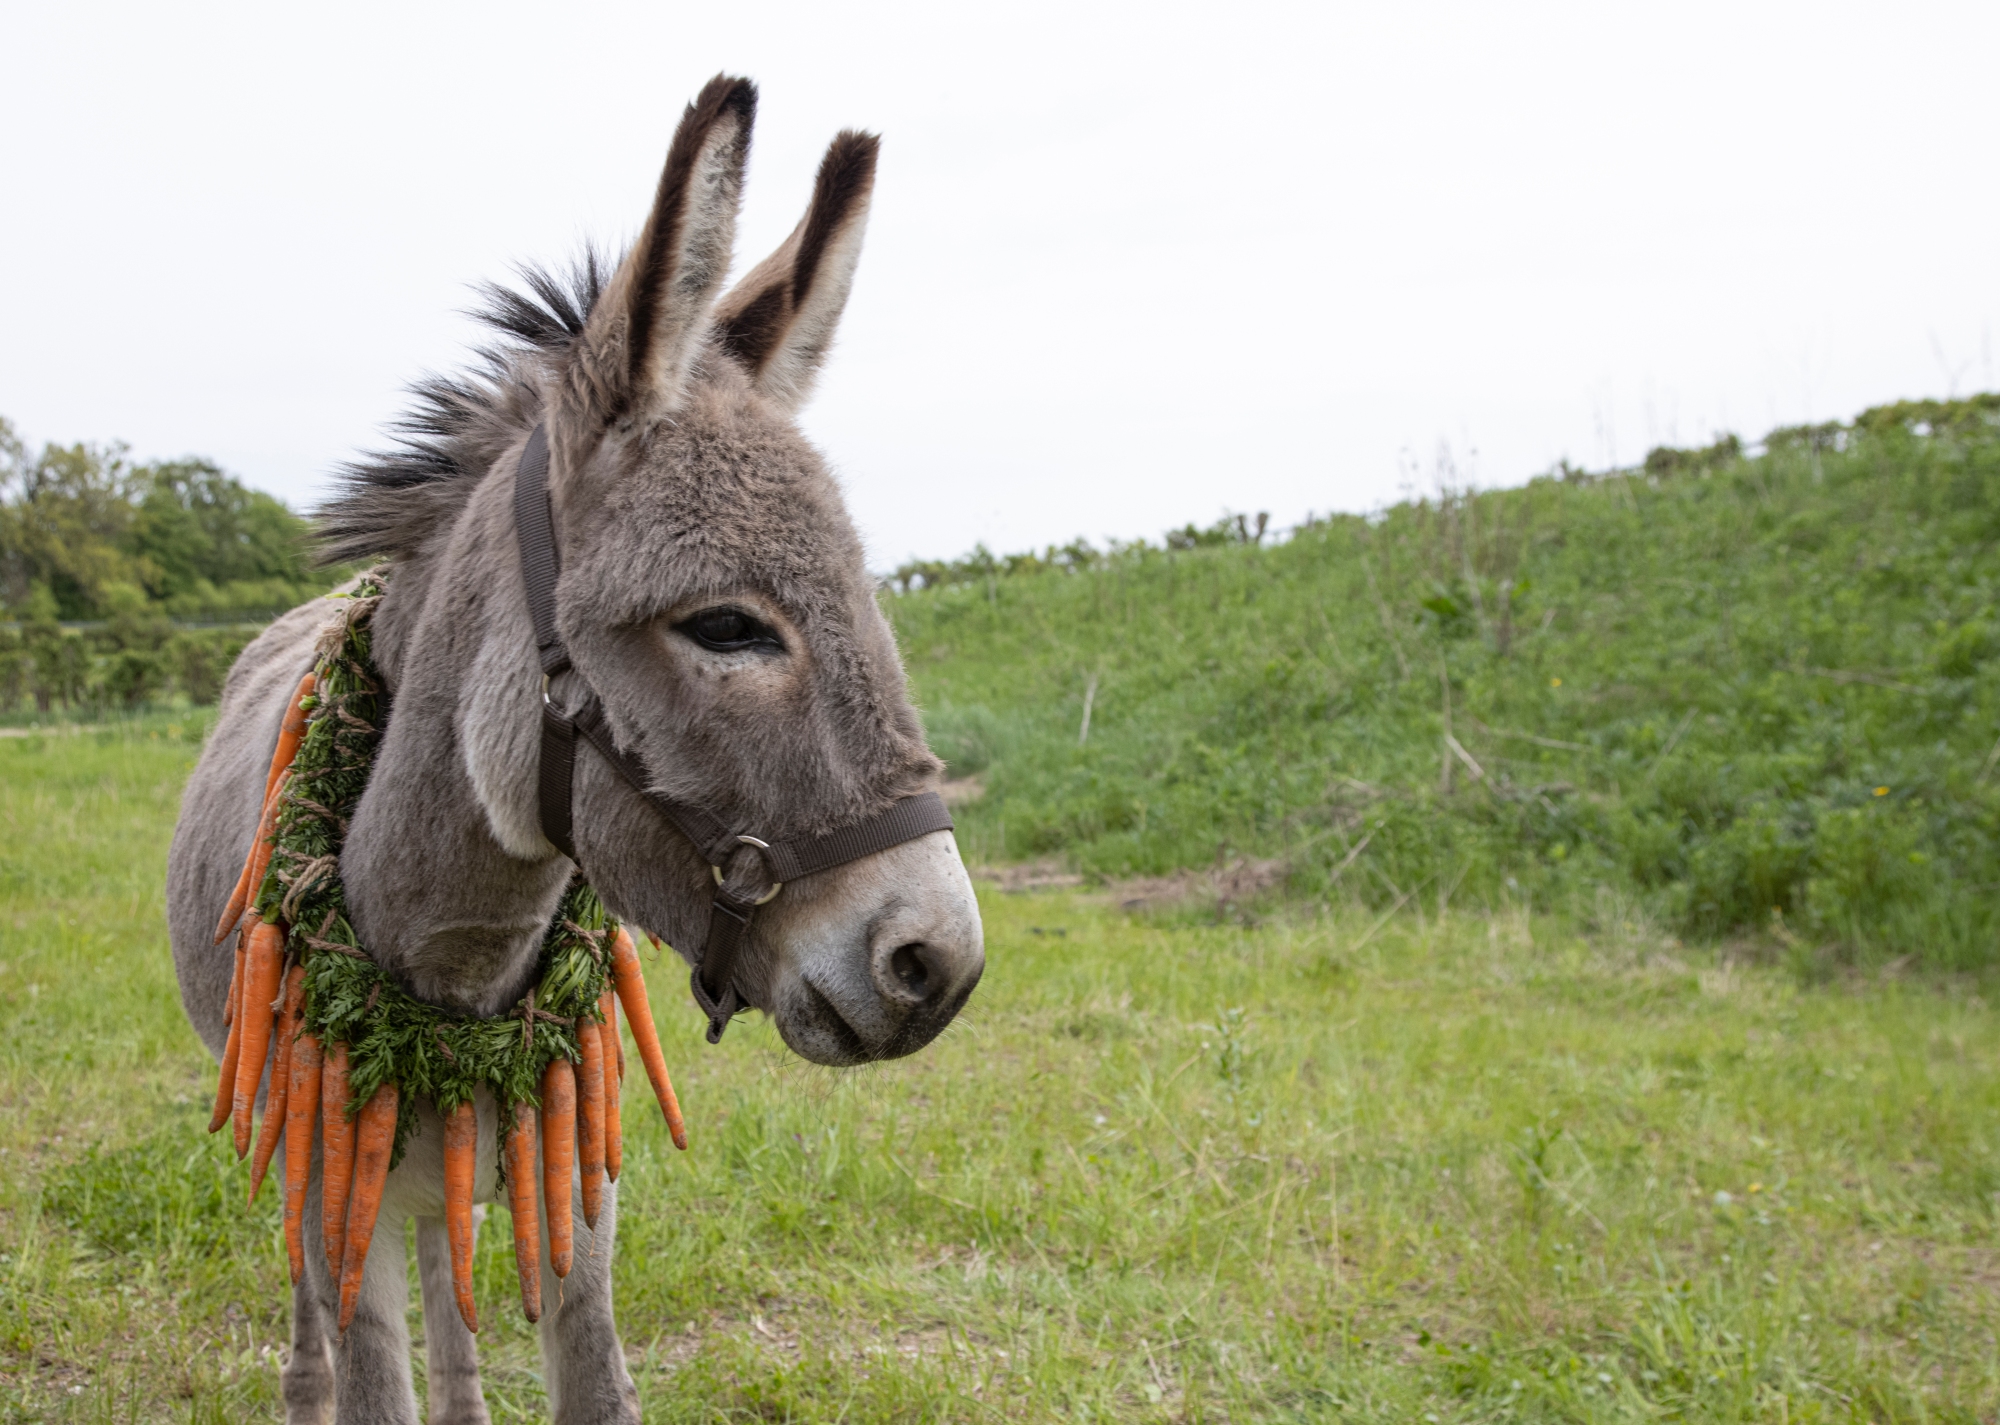 'EO' EO the donkey standing in a grass field with a wreath of carrots around his neck